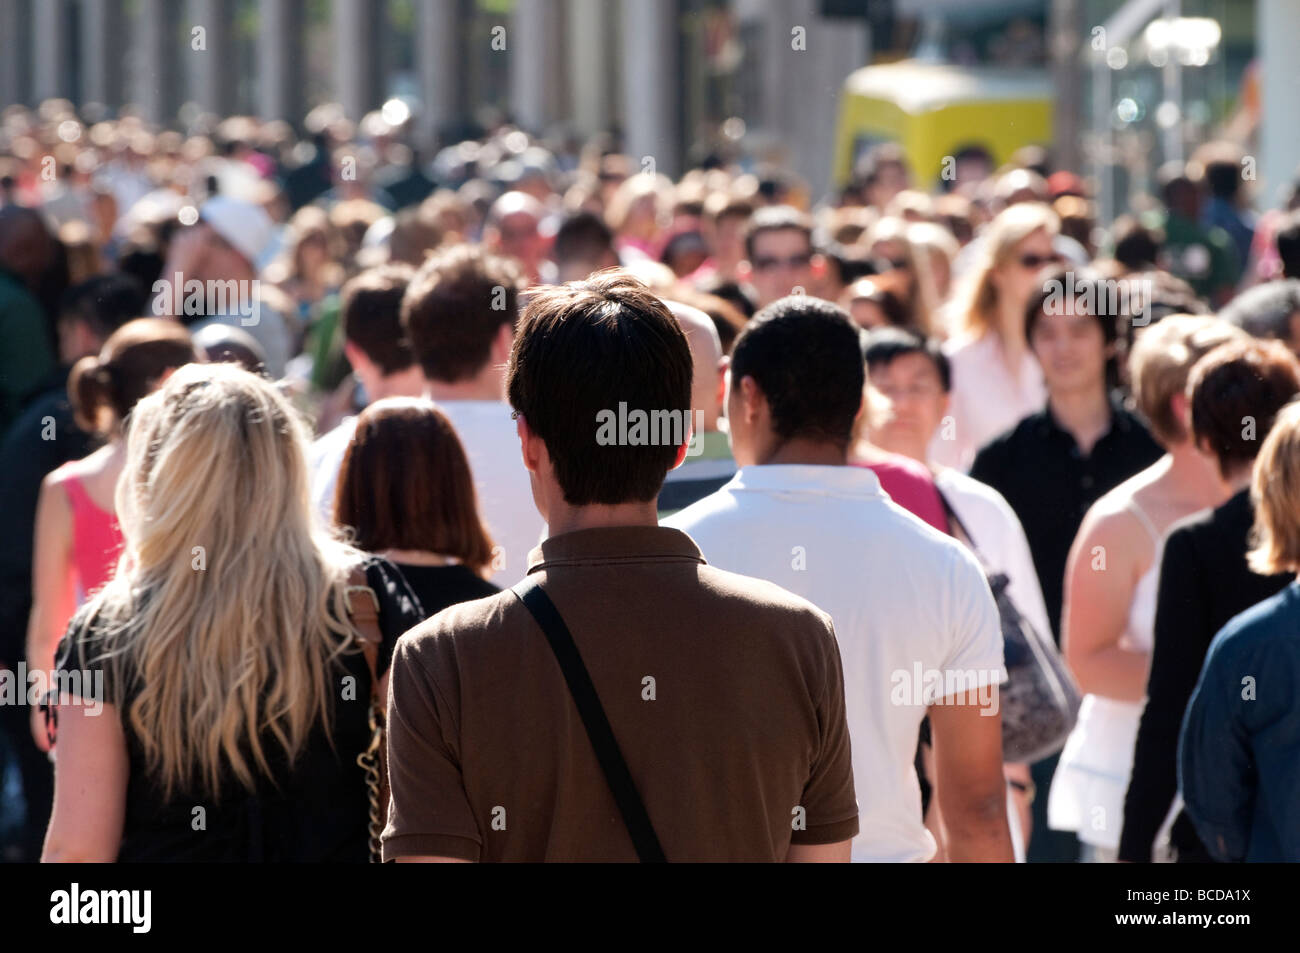 Large crowd of people in Oxford Street London England Britain UK Stock Photo